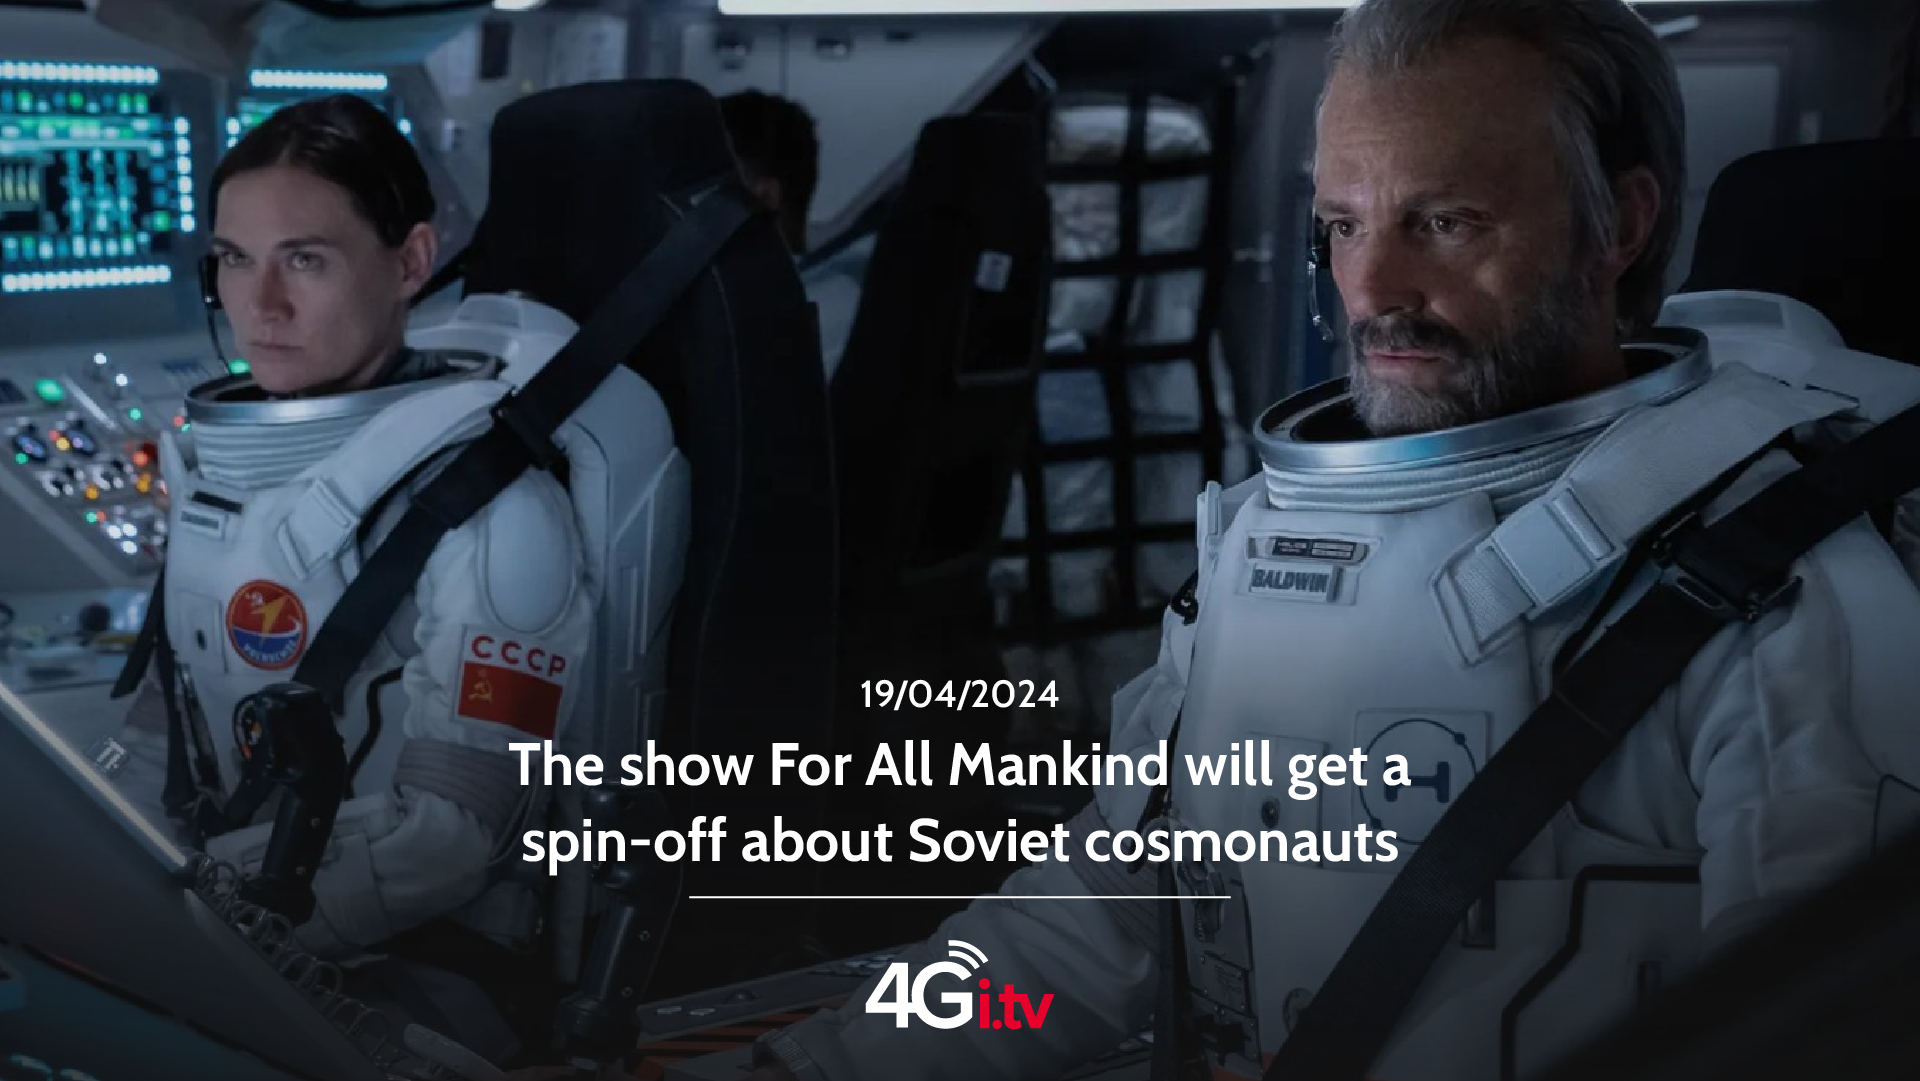 Подробнее о статье The show For All Mankind will get a spin-off about Soviet cosmonauts